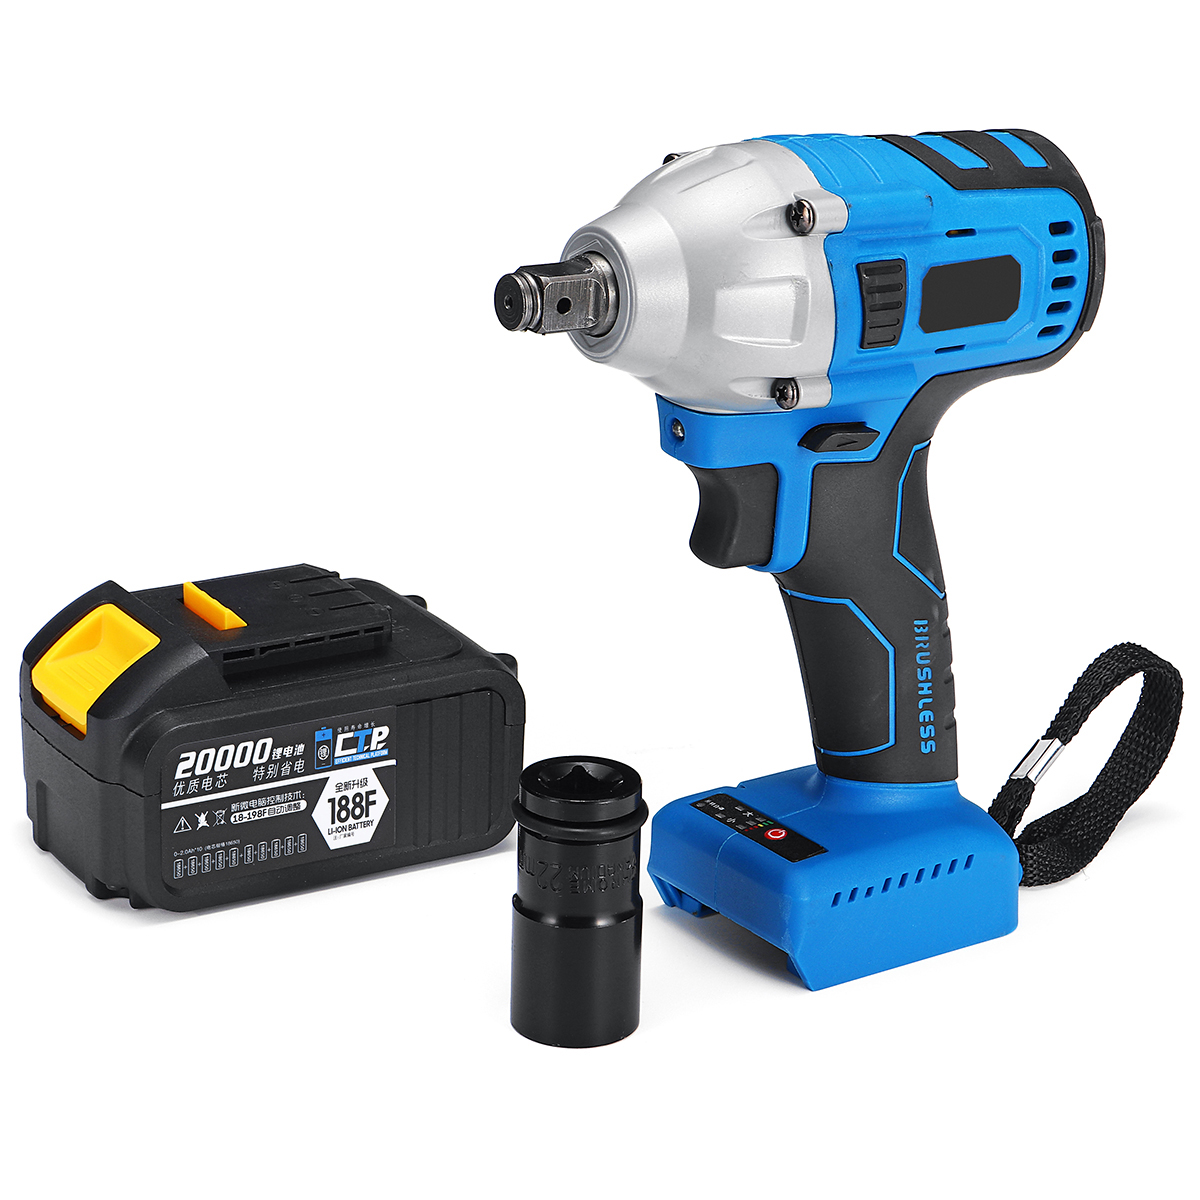 15000-30000mAH-Cordless-Impact-Wrench-Brushless-Electric-Wrench-12-Socket-Tool-1369004-8